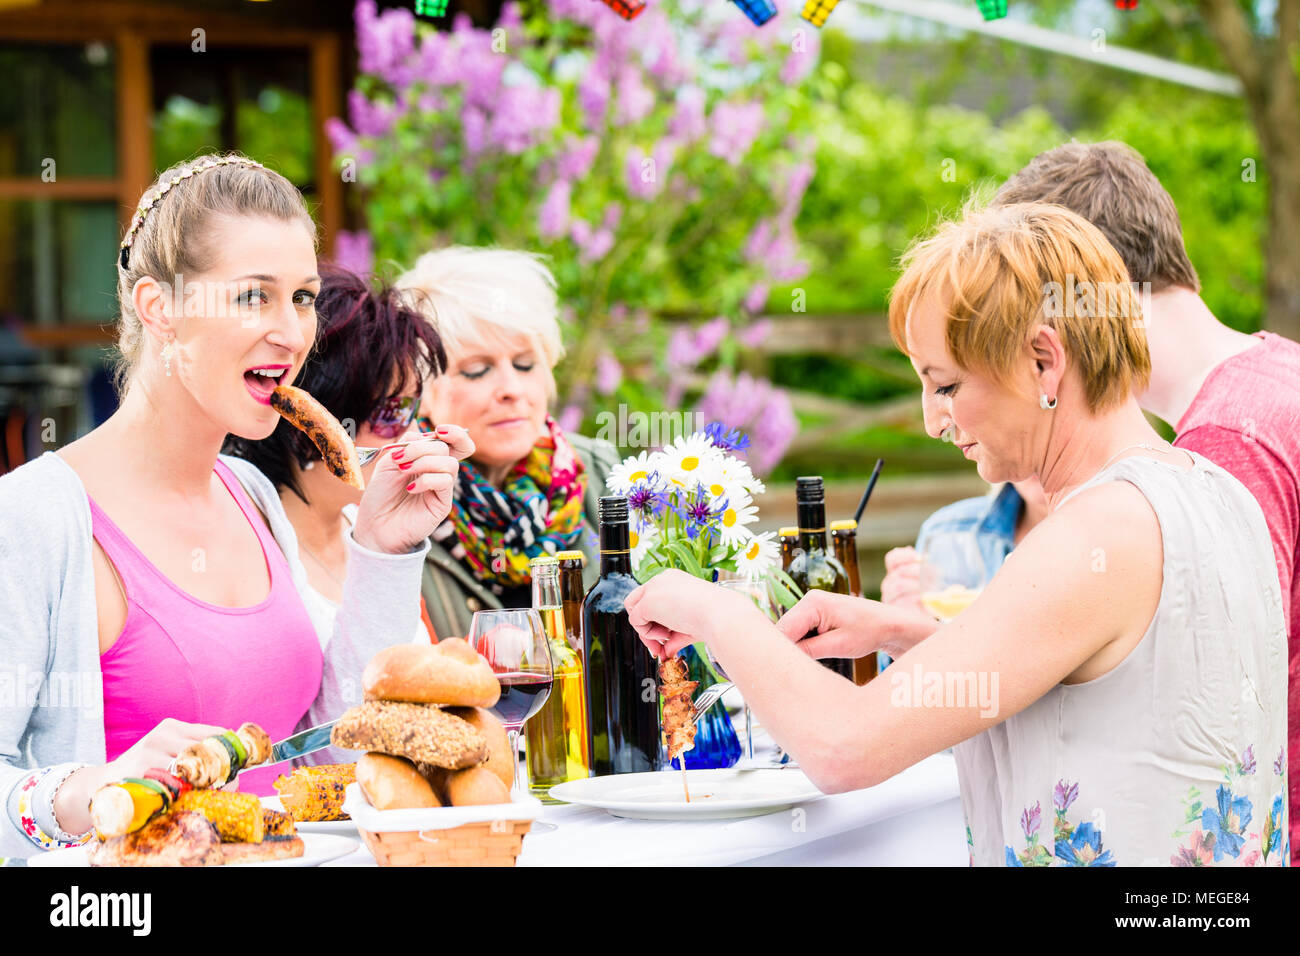 Woman eating grilled sausage on bbq party Stock Photo